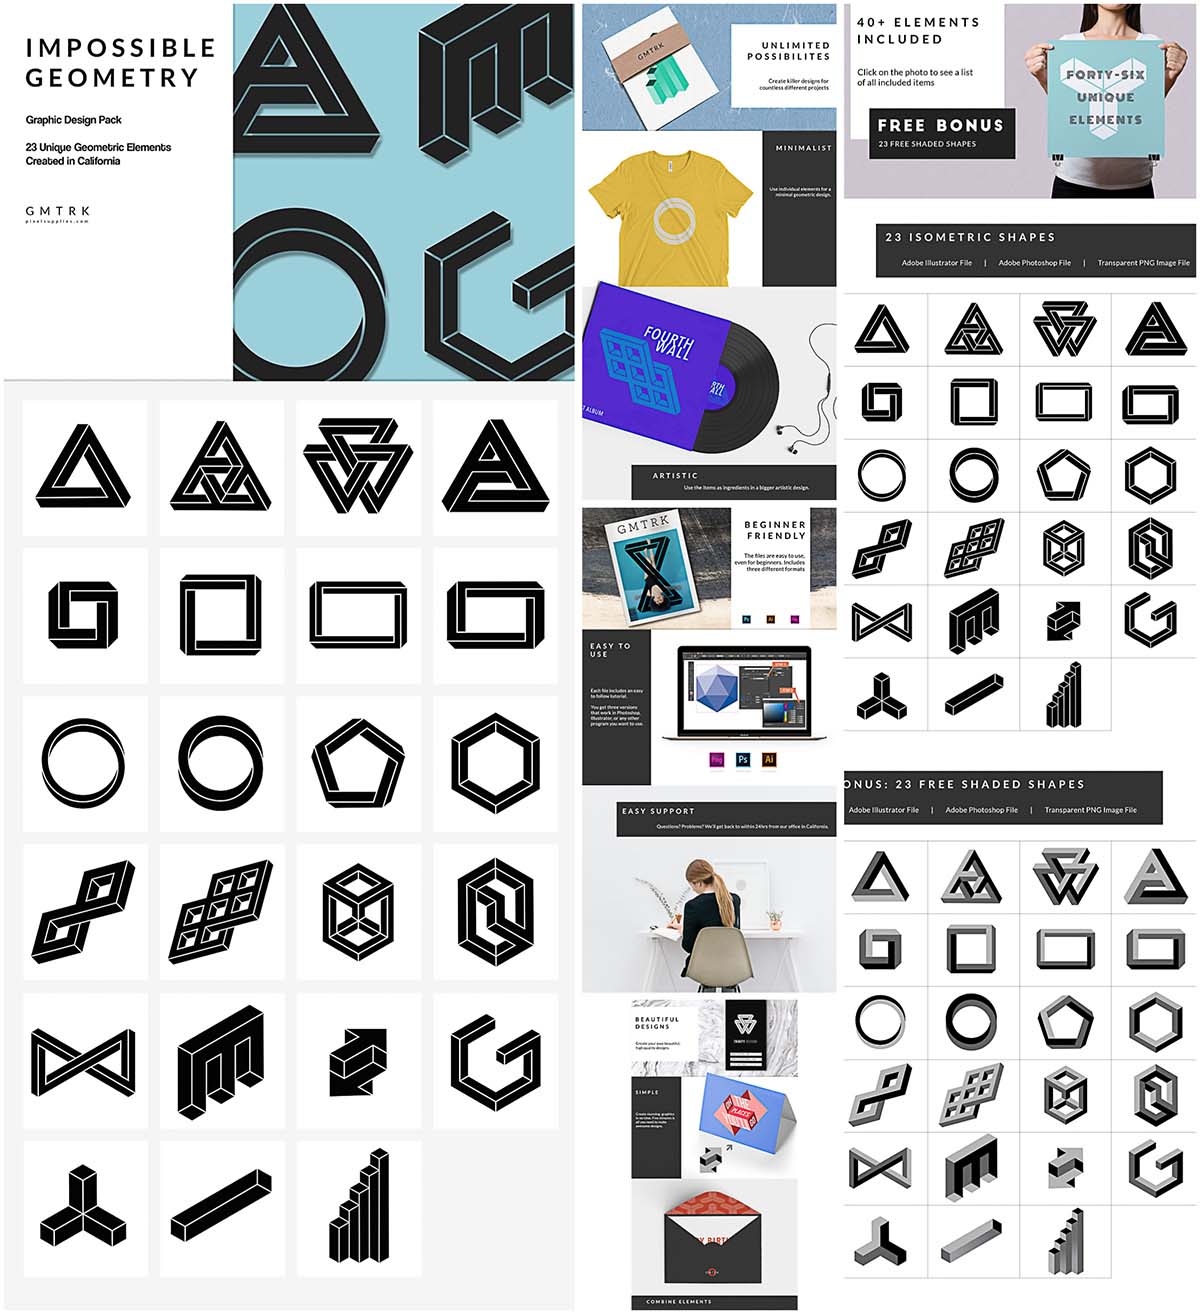 Impossible geometry illustration collection